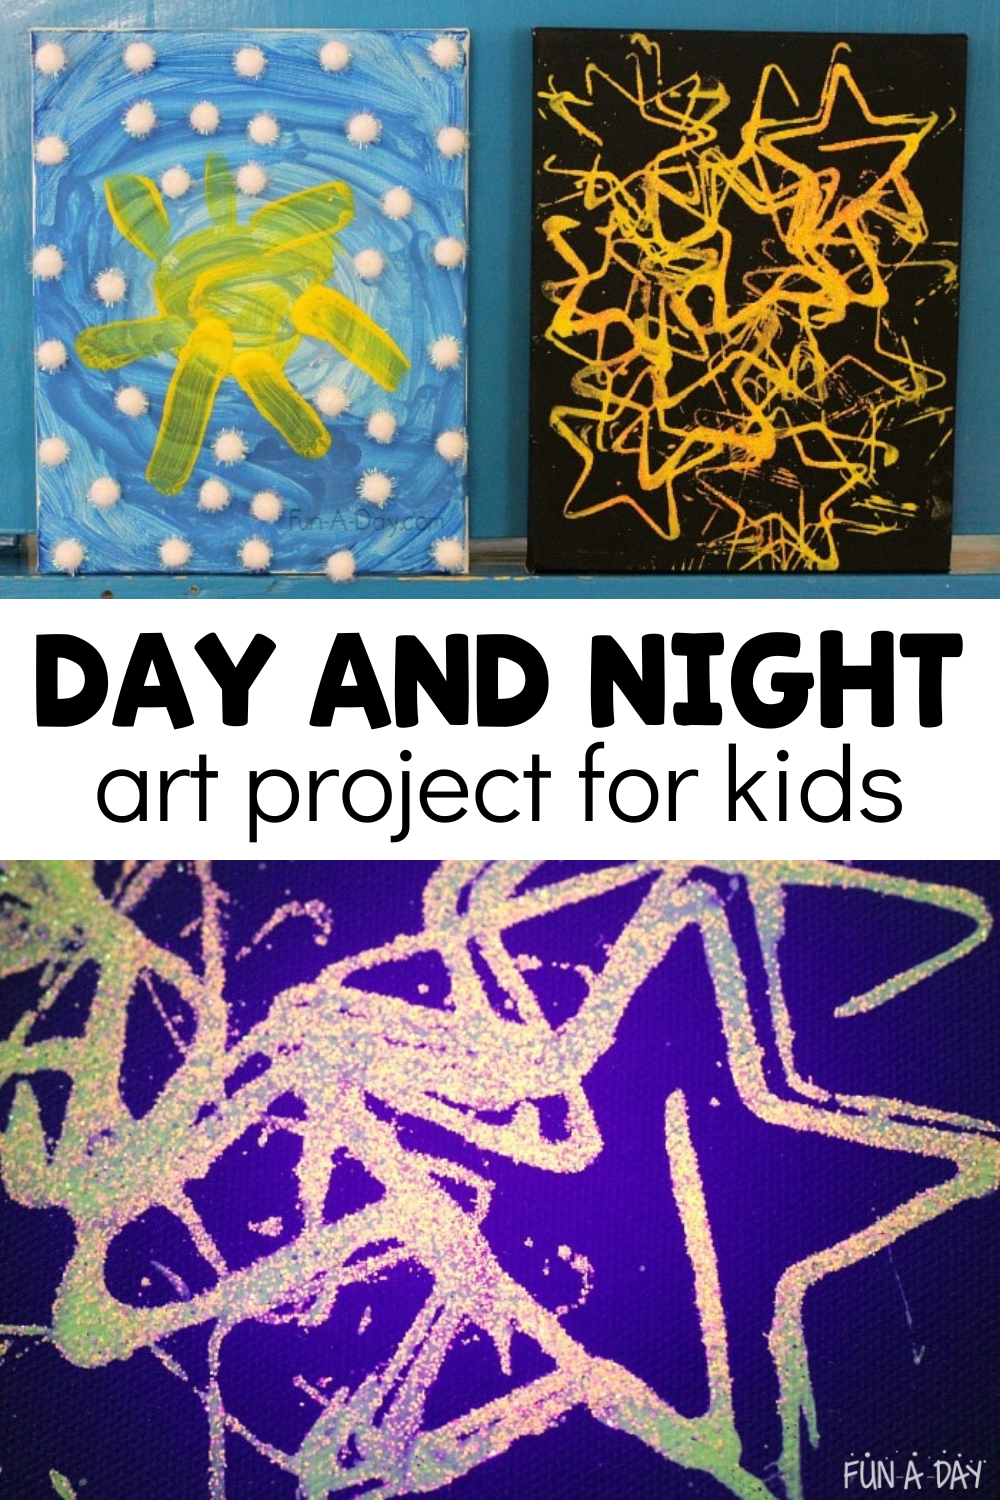 day sky and night sky canvases with text that reads day and night art project for kids